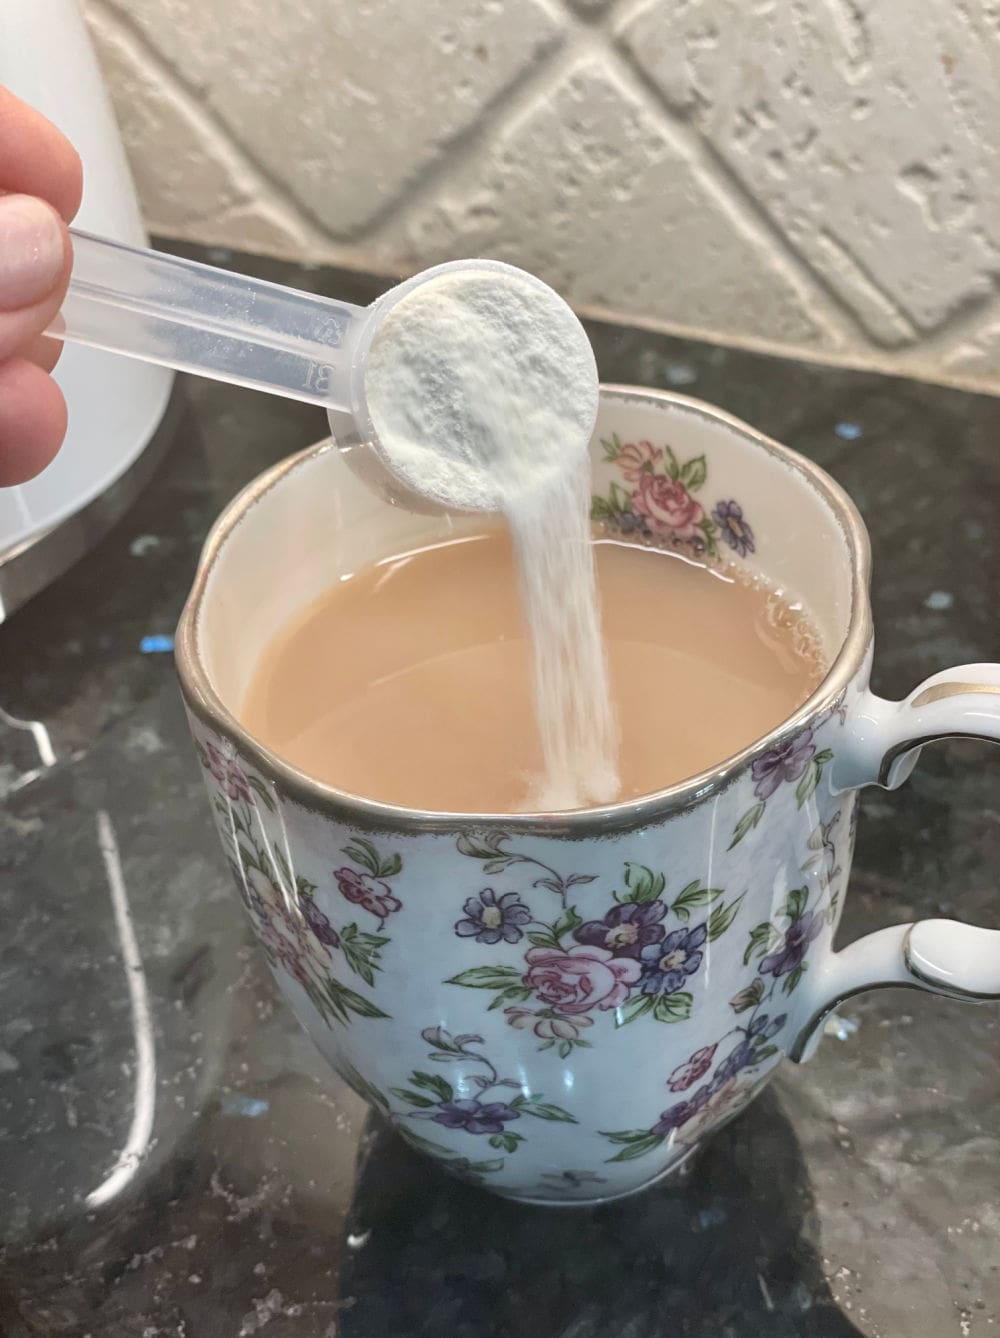 pouring collagen powder into cup of tea